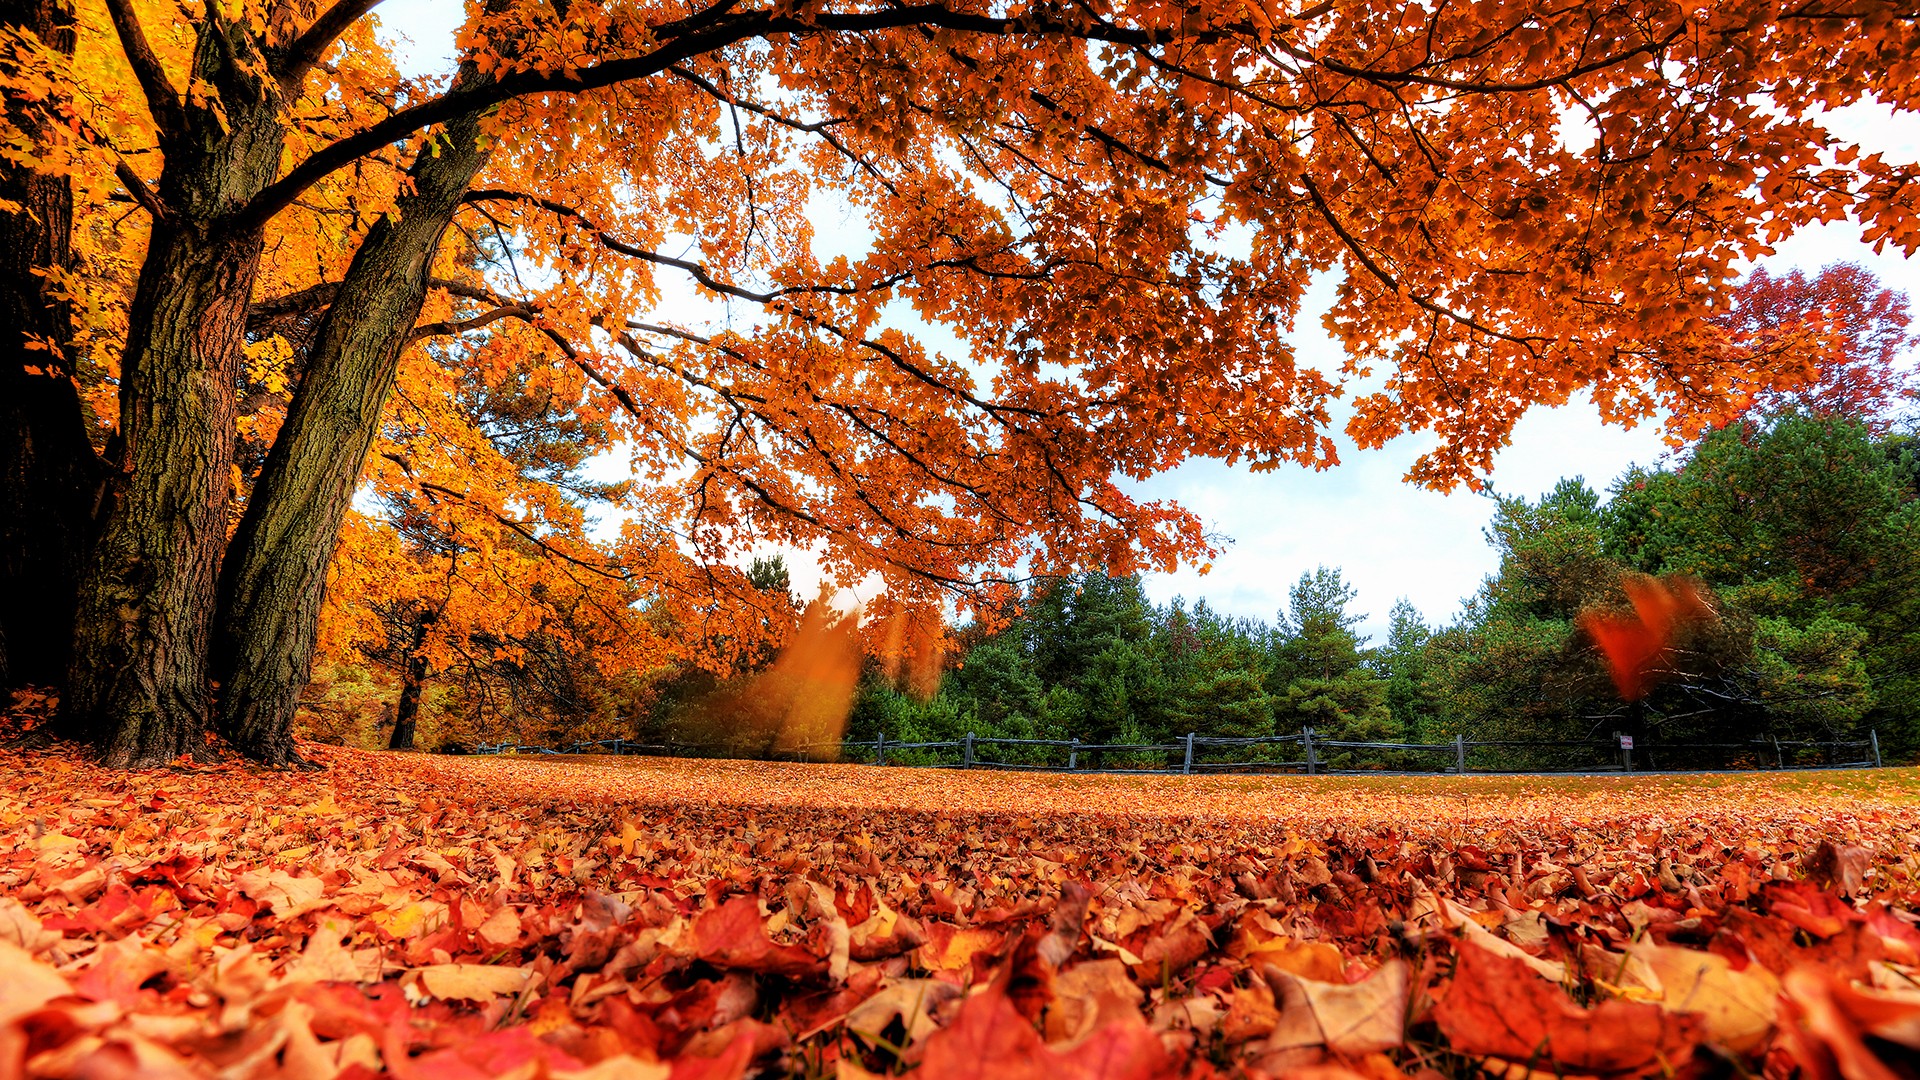 General 1920x1080 fall trees leaves landscape outdoors park fallen leaves